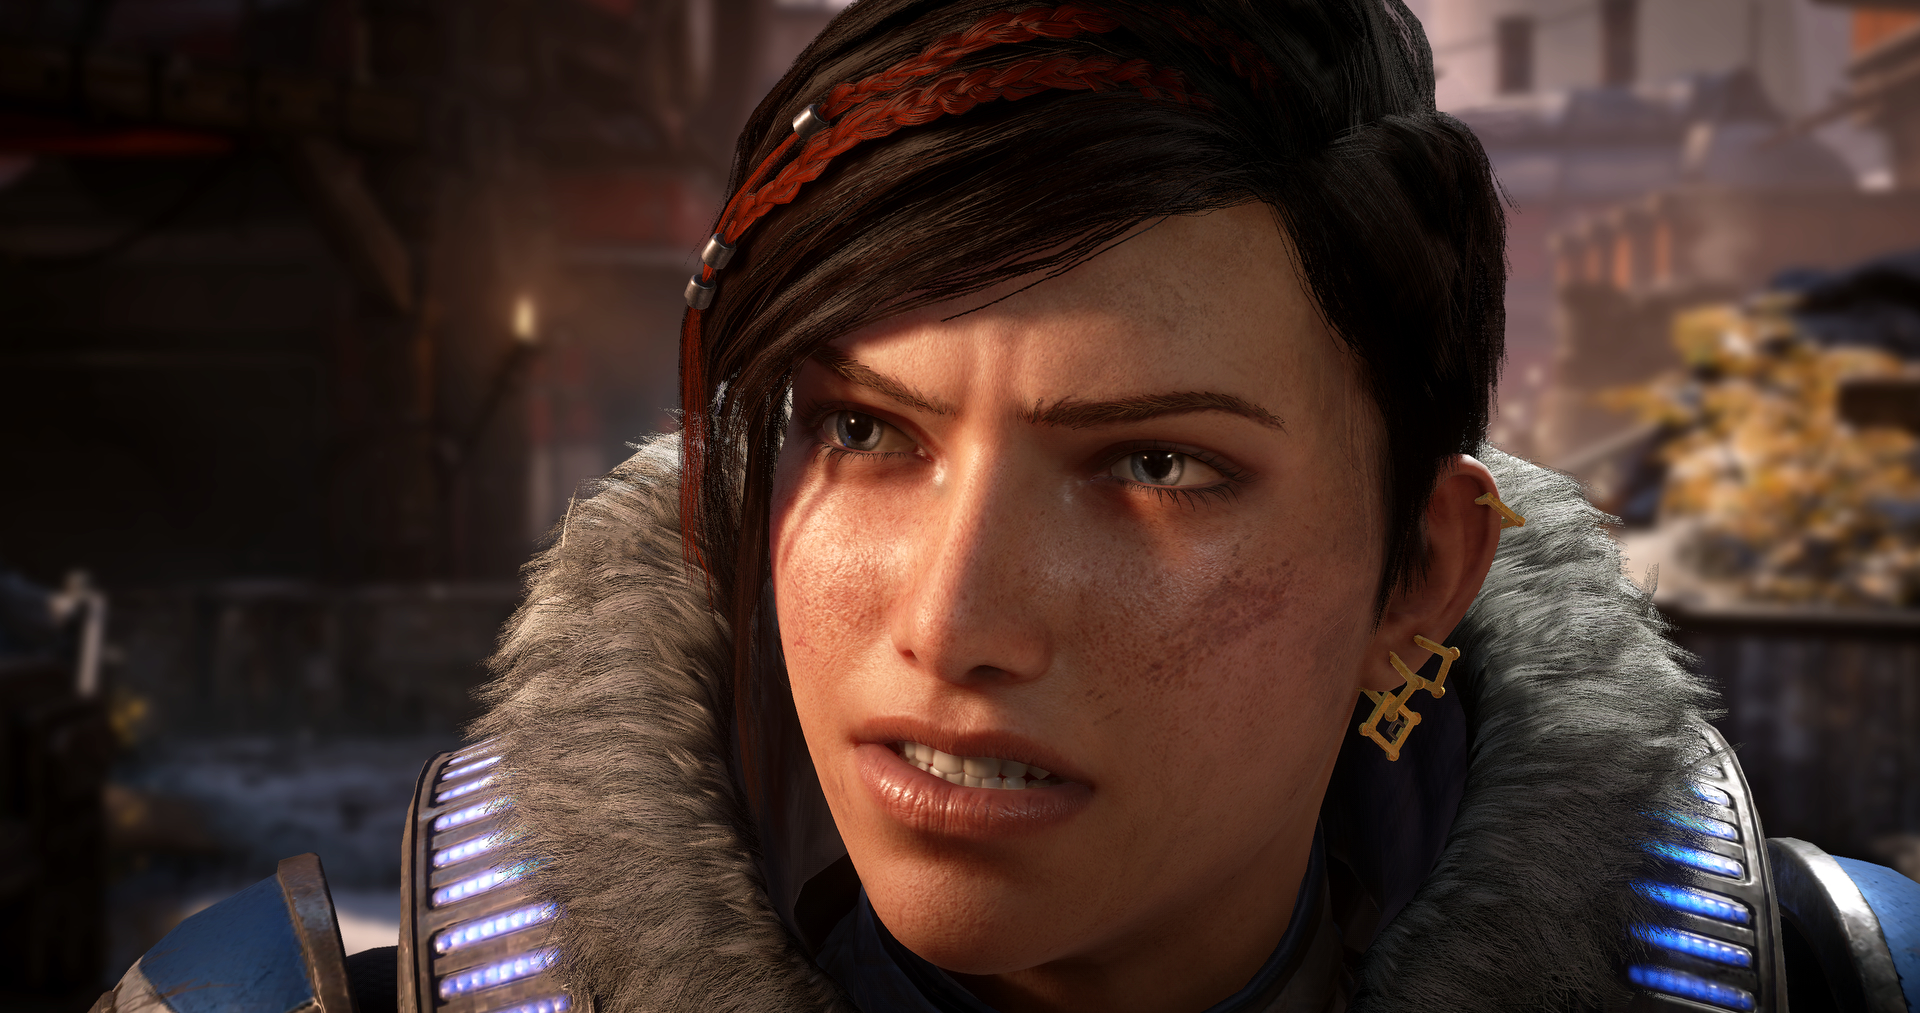 Gears 5 Review – This Changes Everything